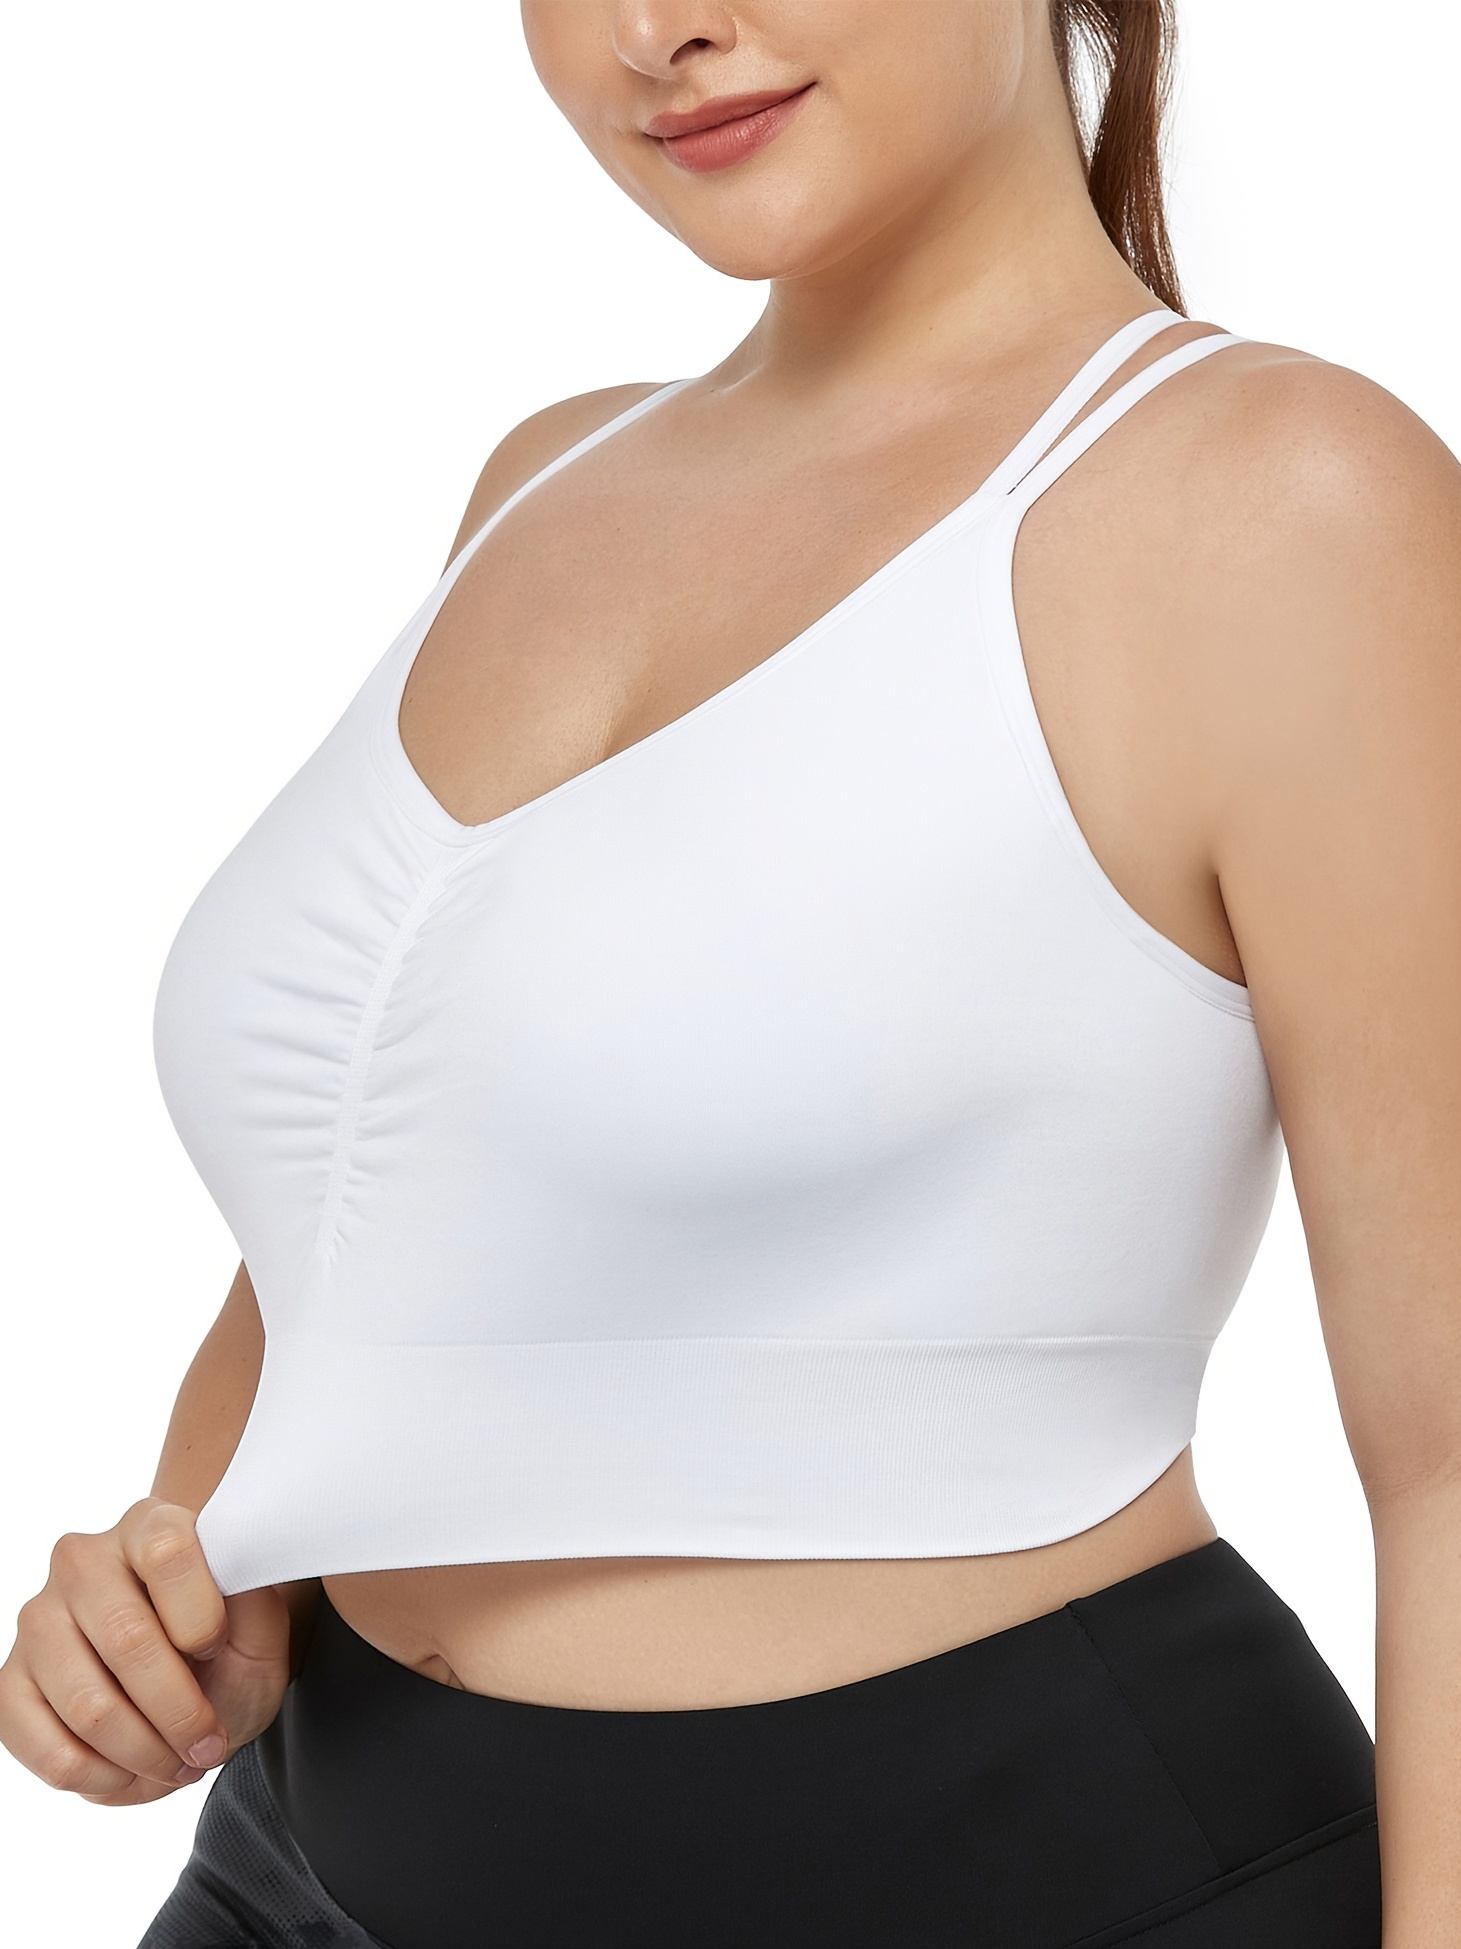 Plus Size Sports Bra, Women's Plus Solid Ruched Strappy Crisscross Back  High Stretch Seamless Fitness Bra